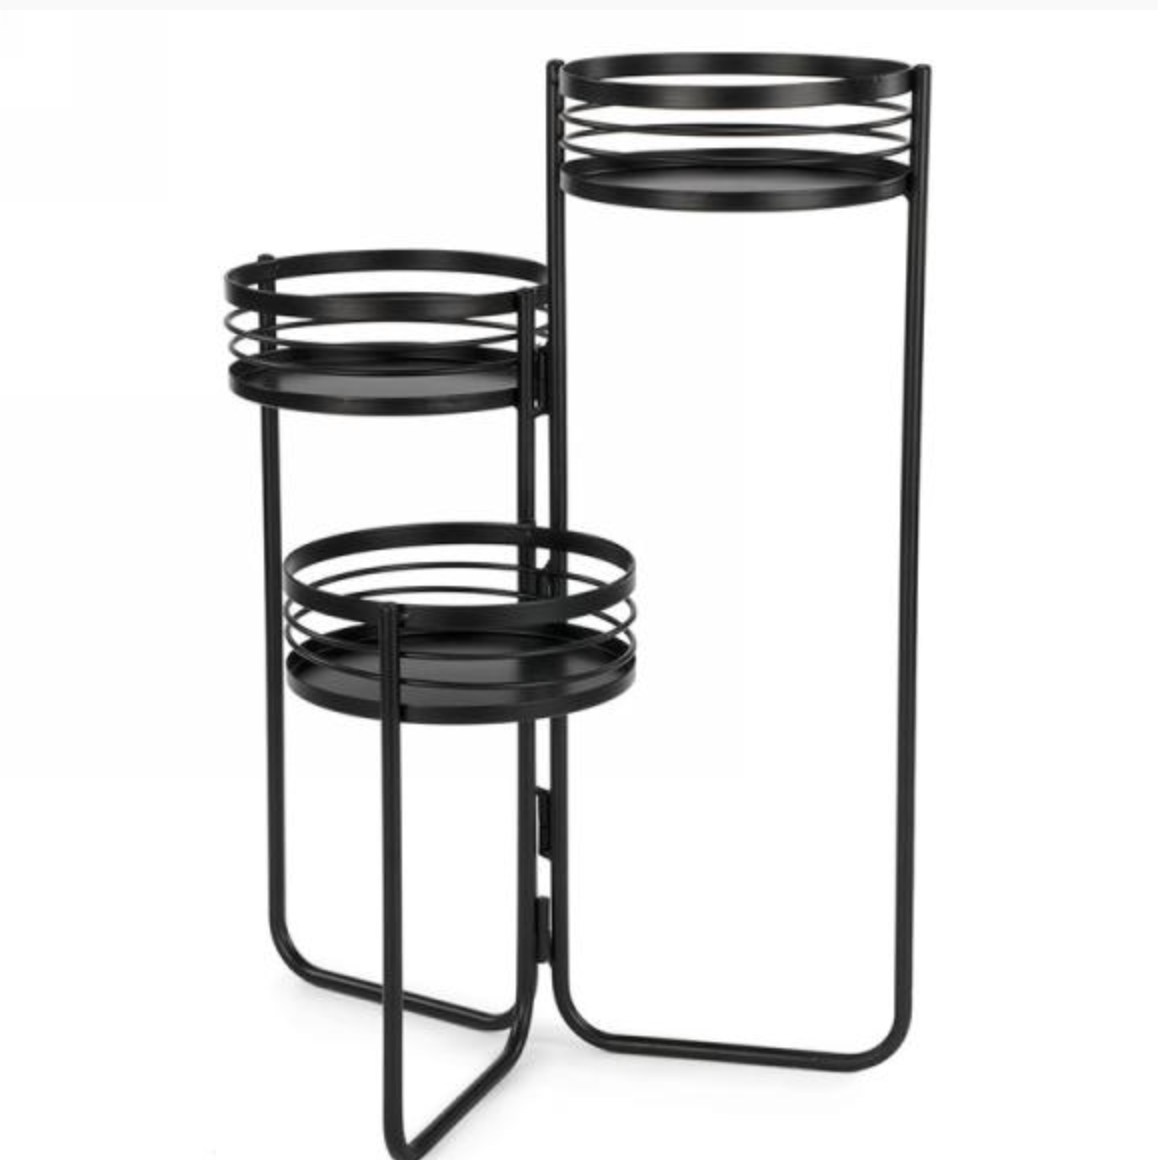 Triple Plant Stand